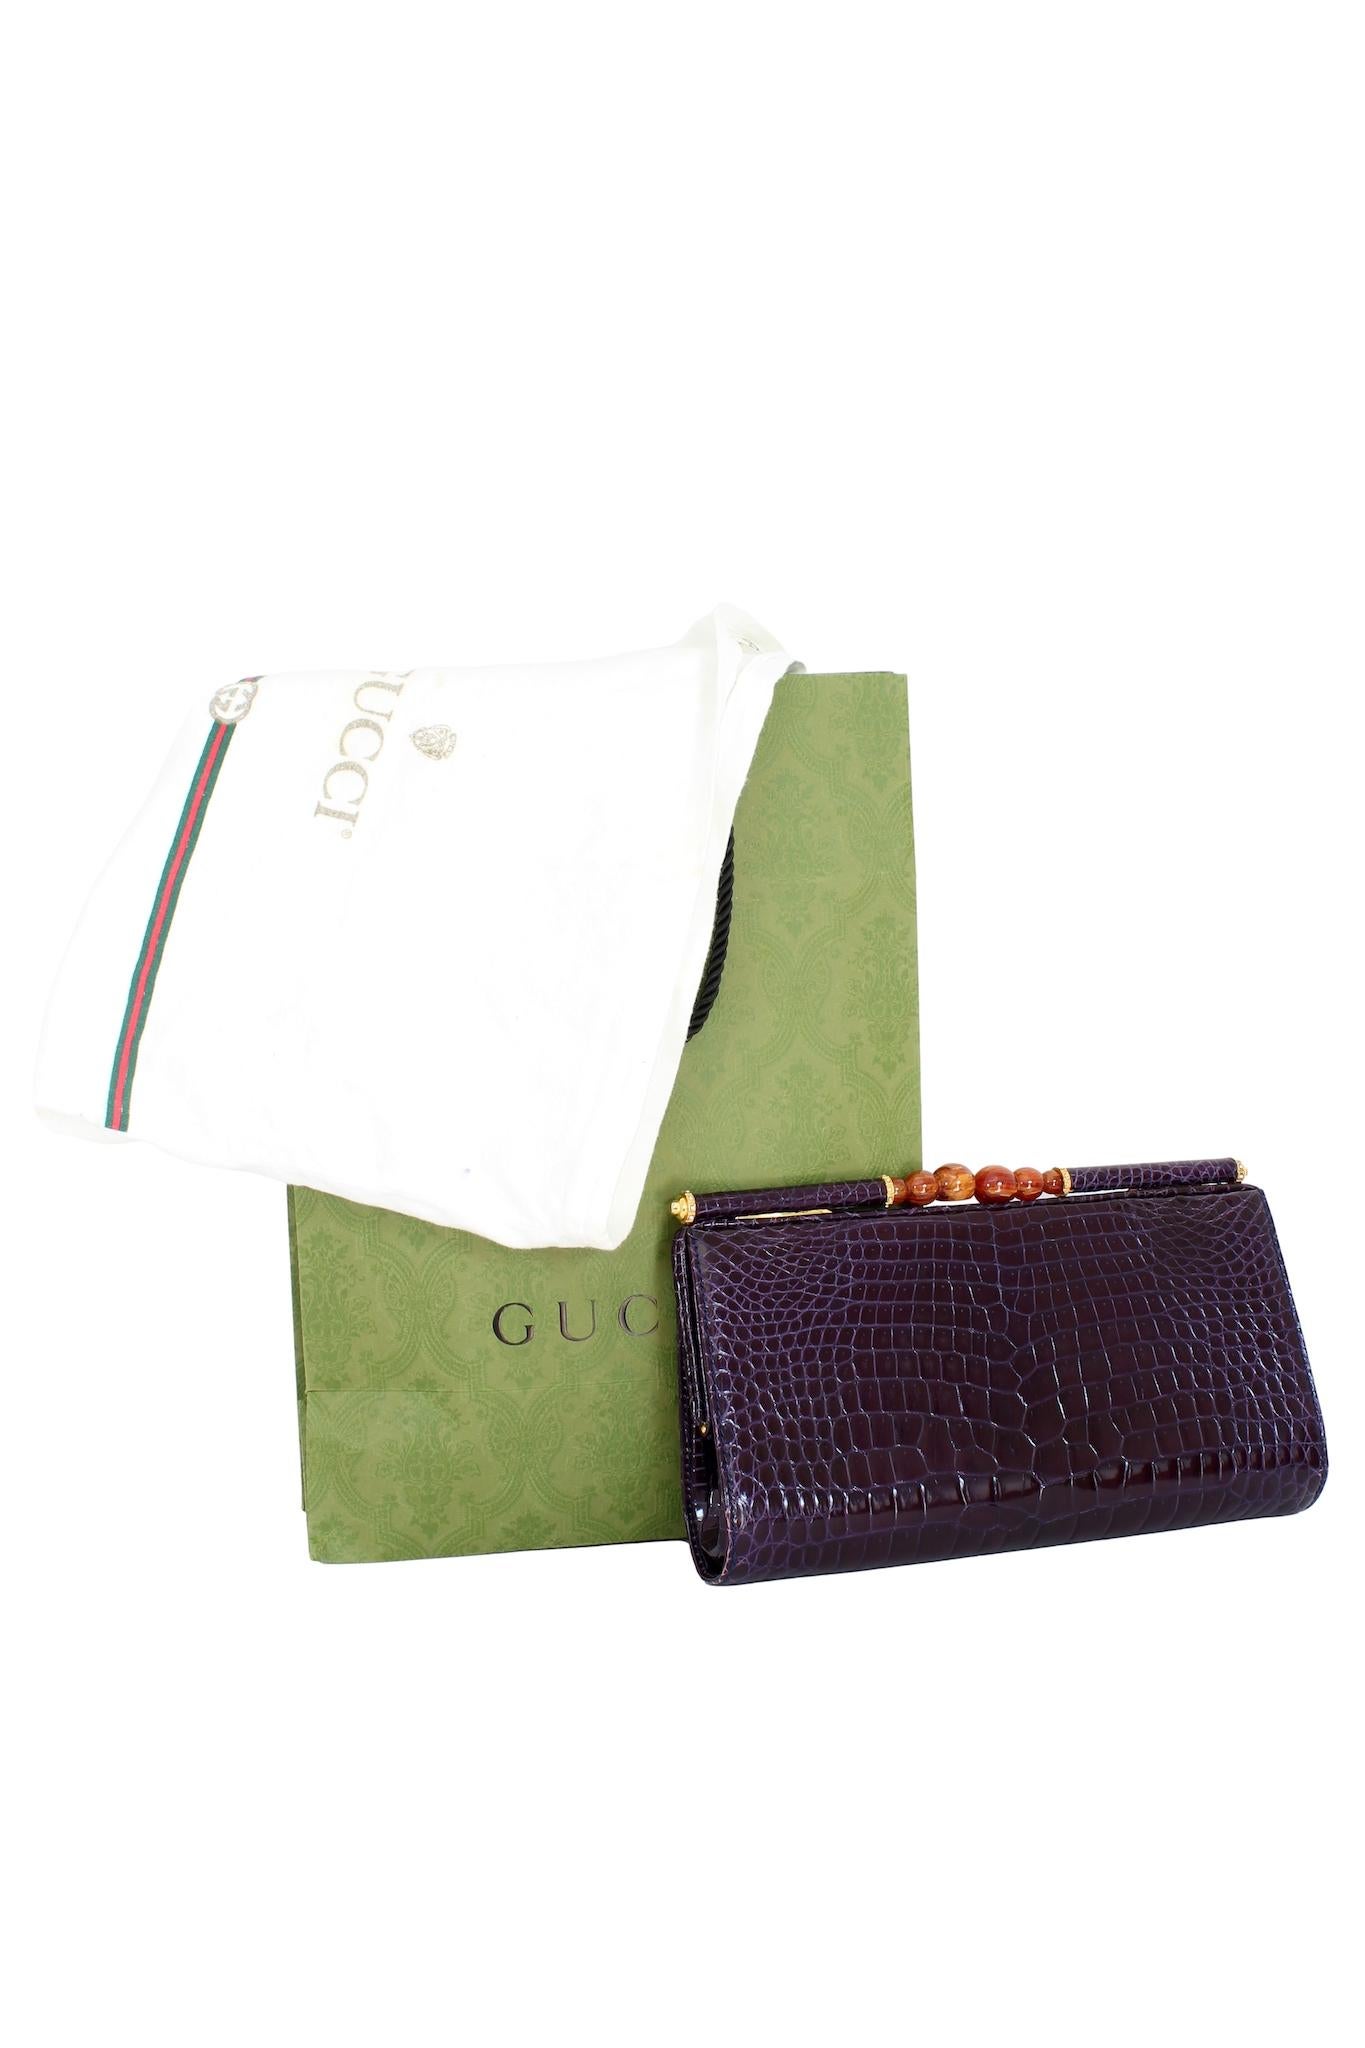 Gucci Violet Leather Crocodile Vintage Rare Bag 1970s In Excellent Condition In Brindisi, Bt